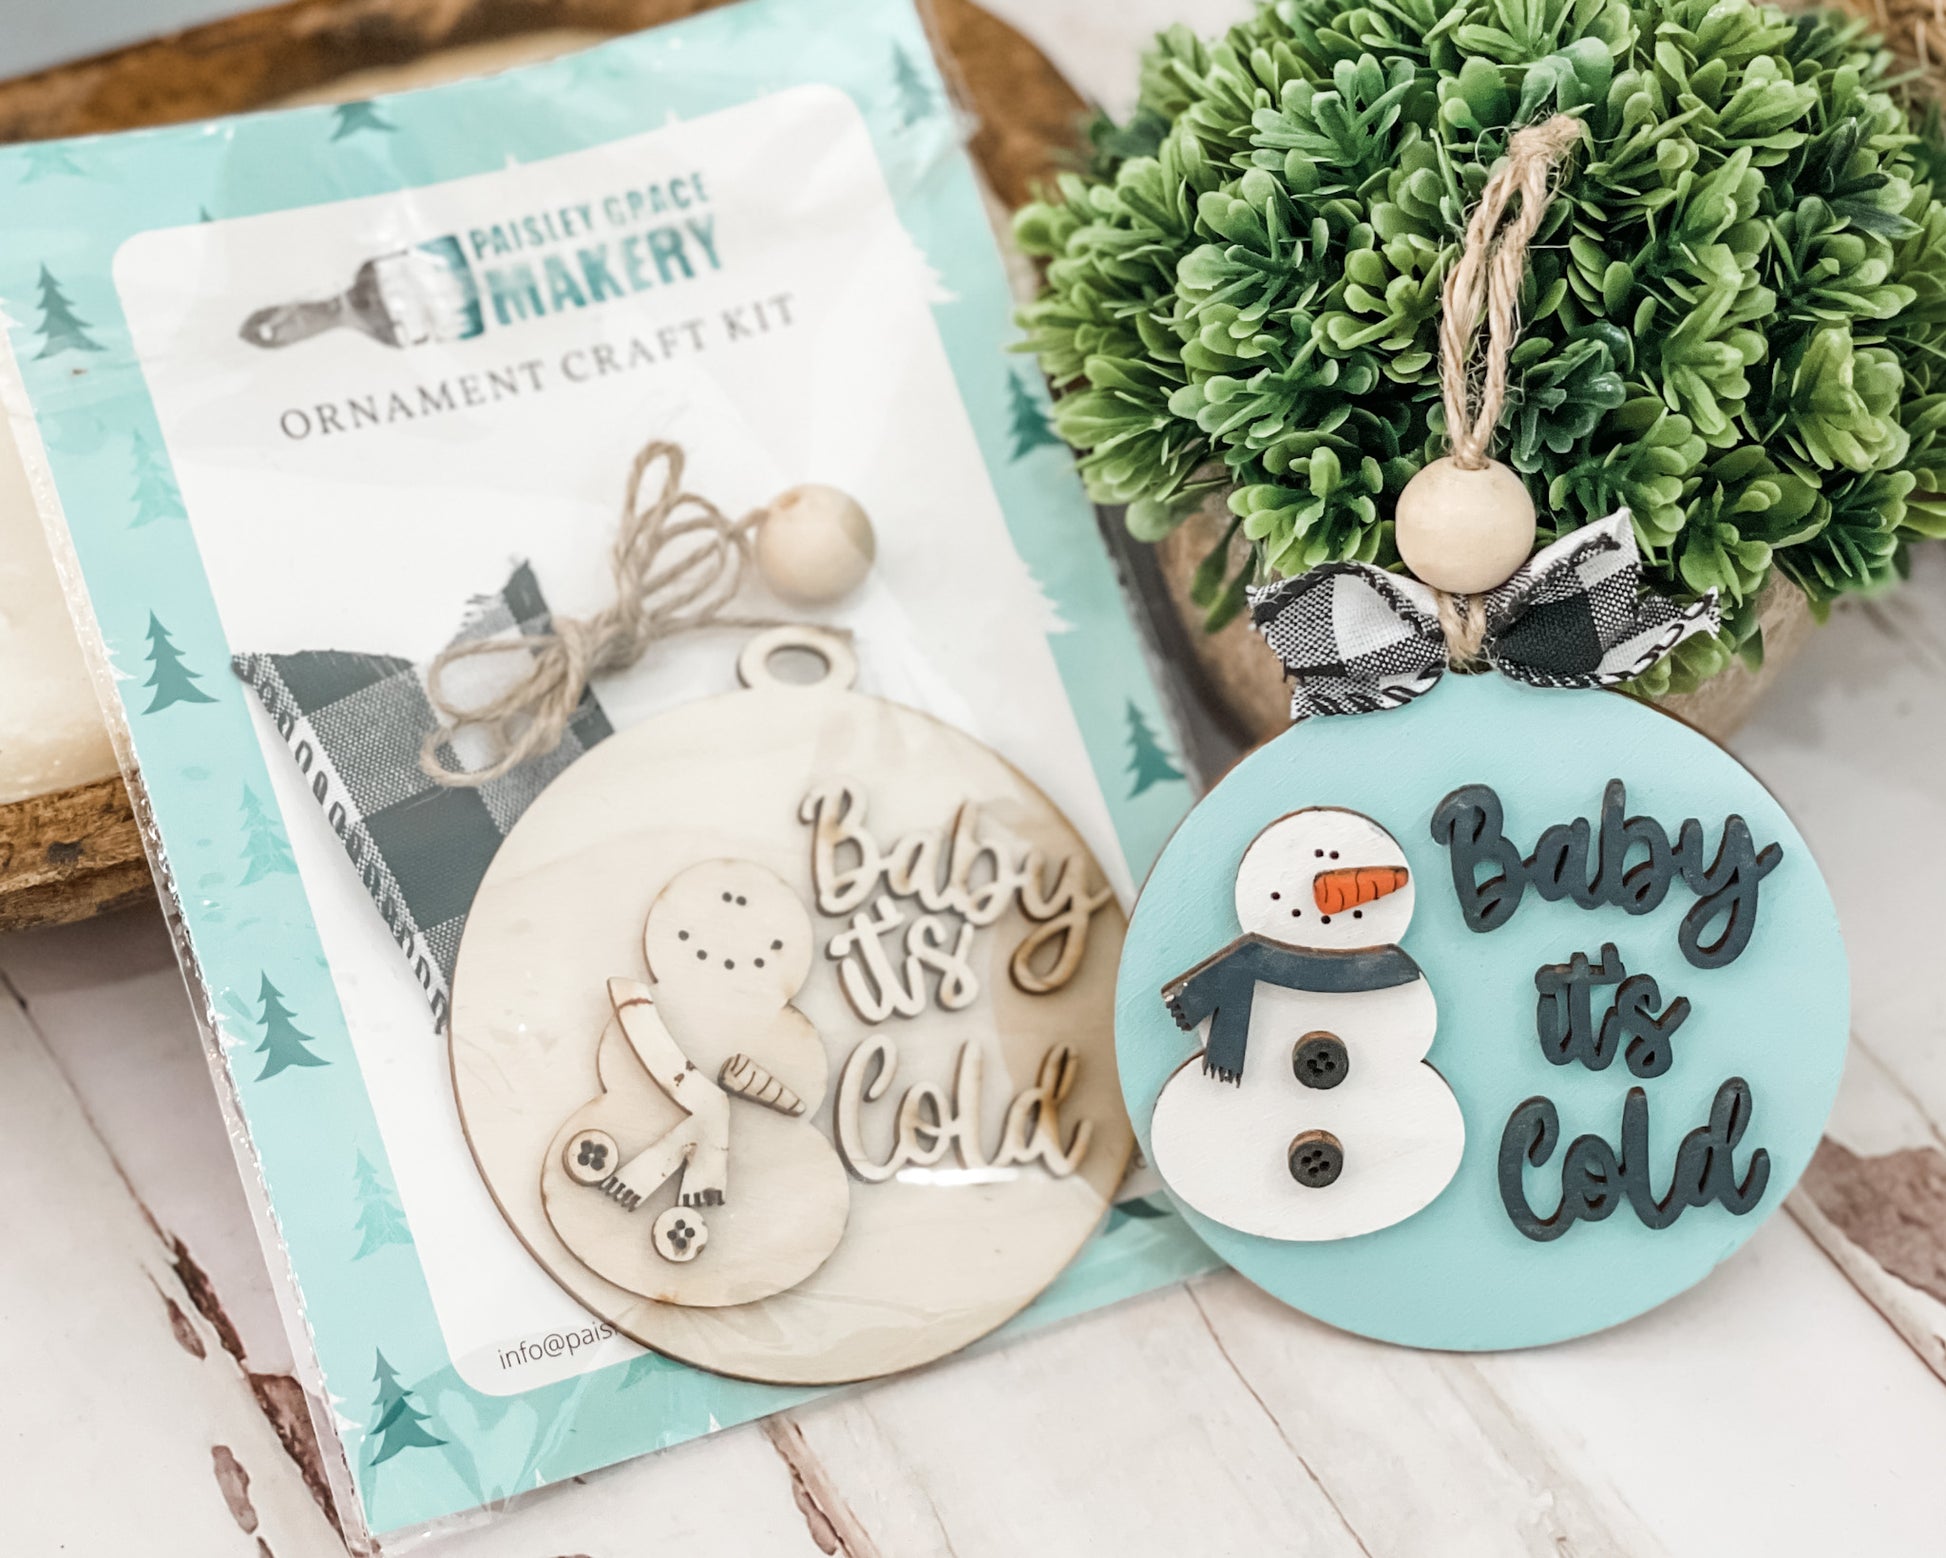 Baby It's Cold Outside Ornament Craft Set - Paisley Grace Makery